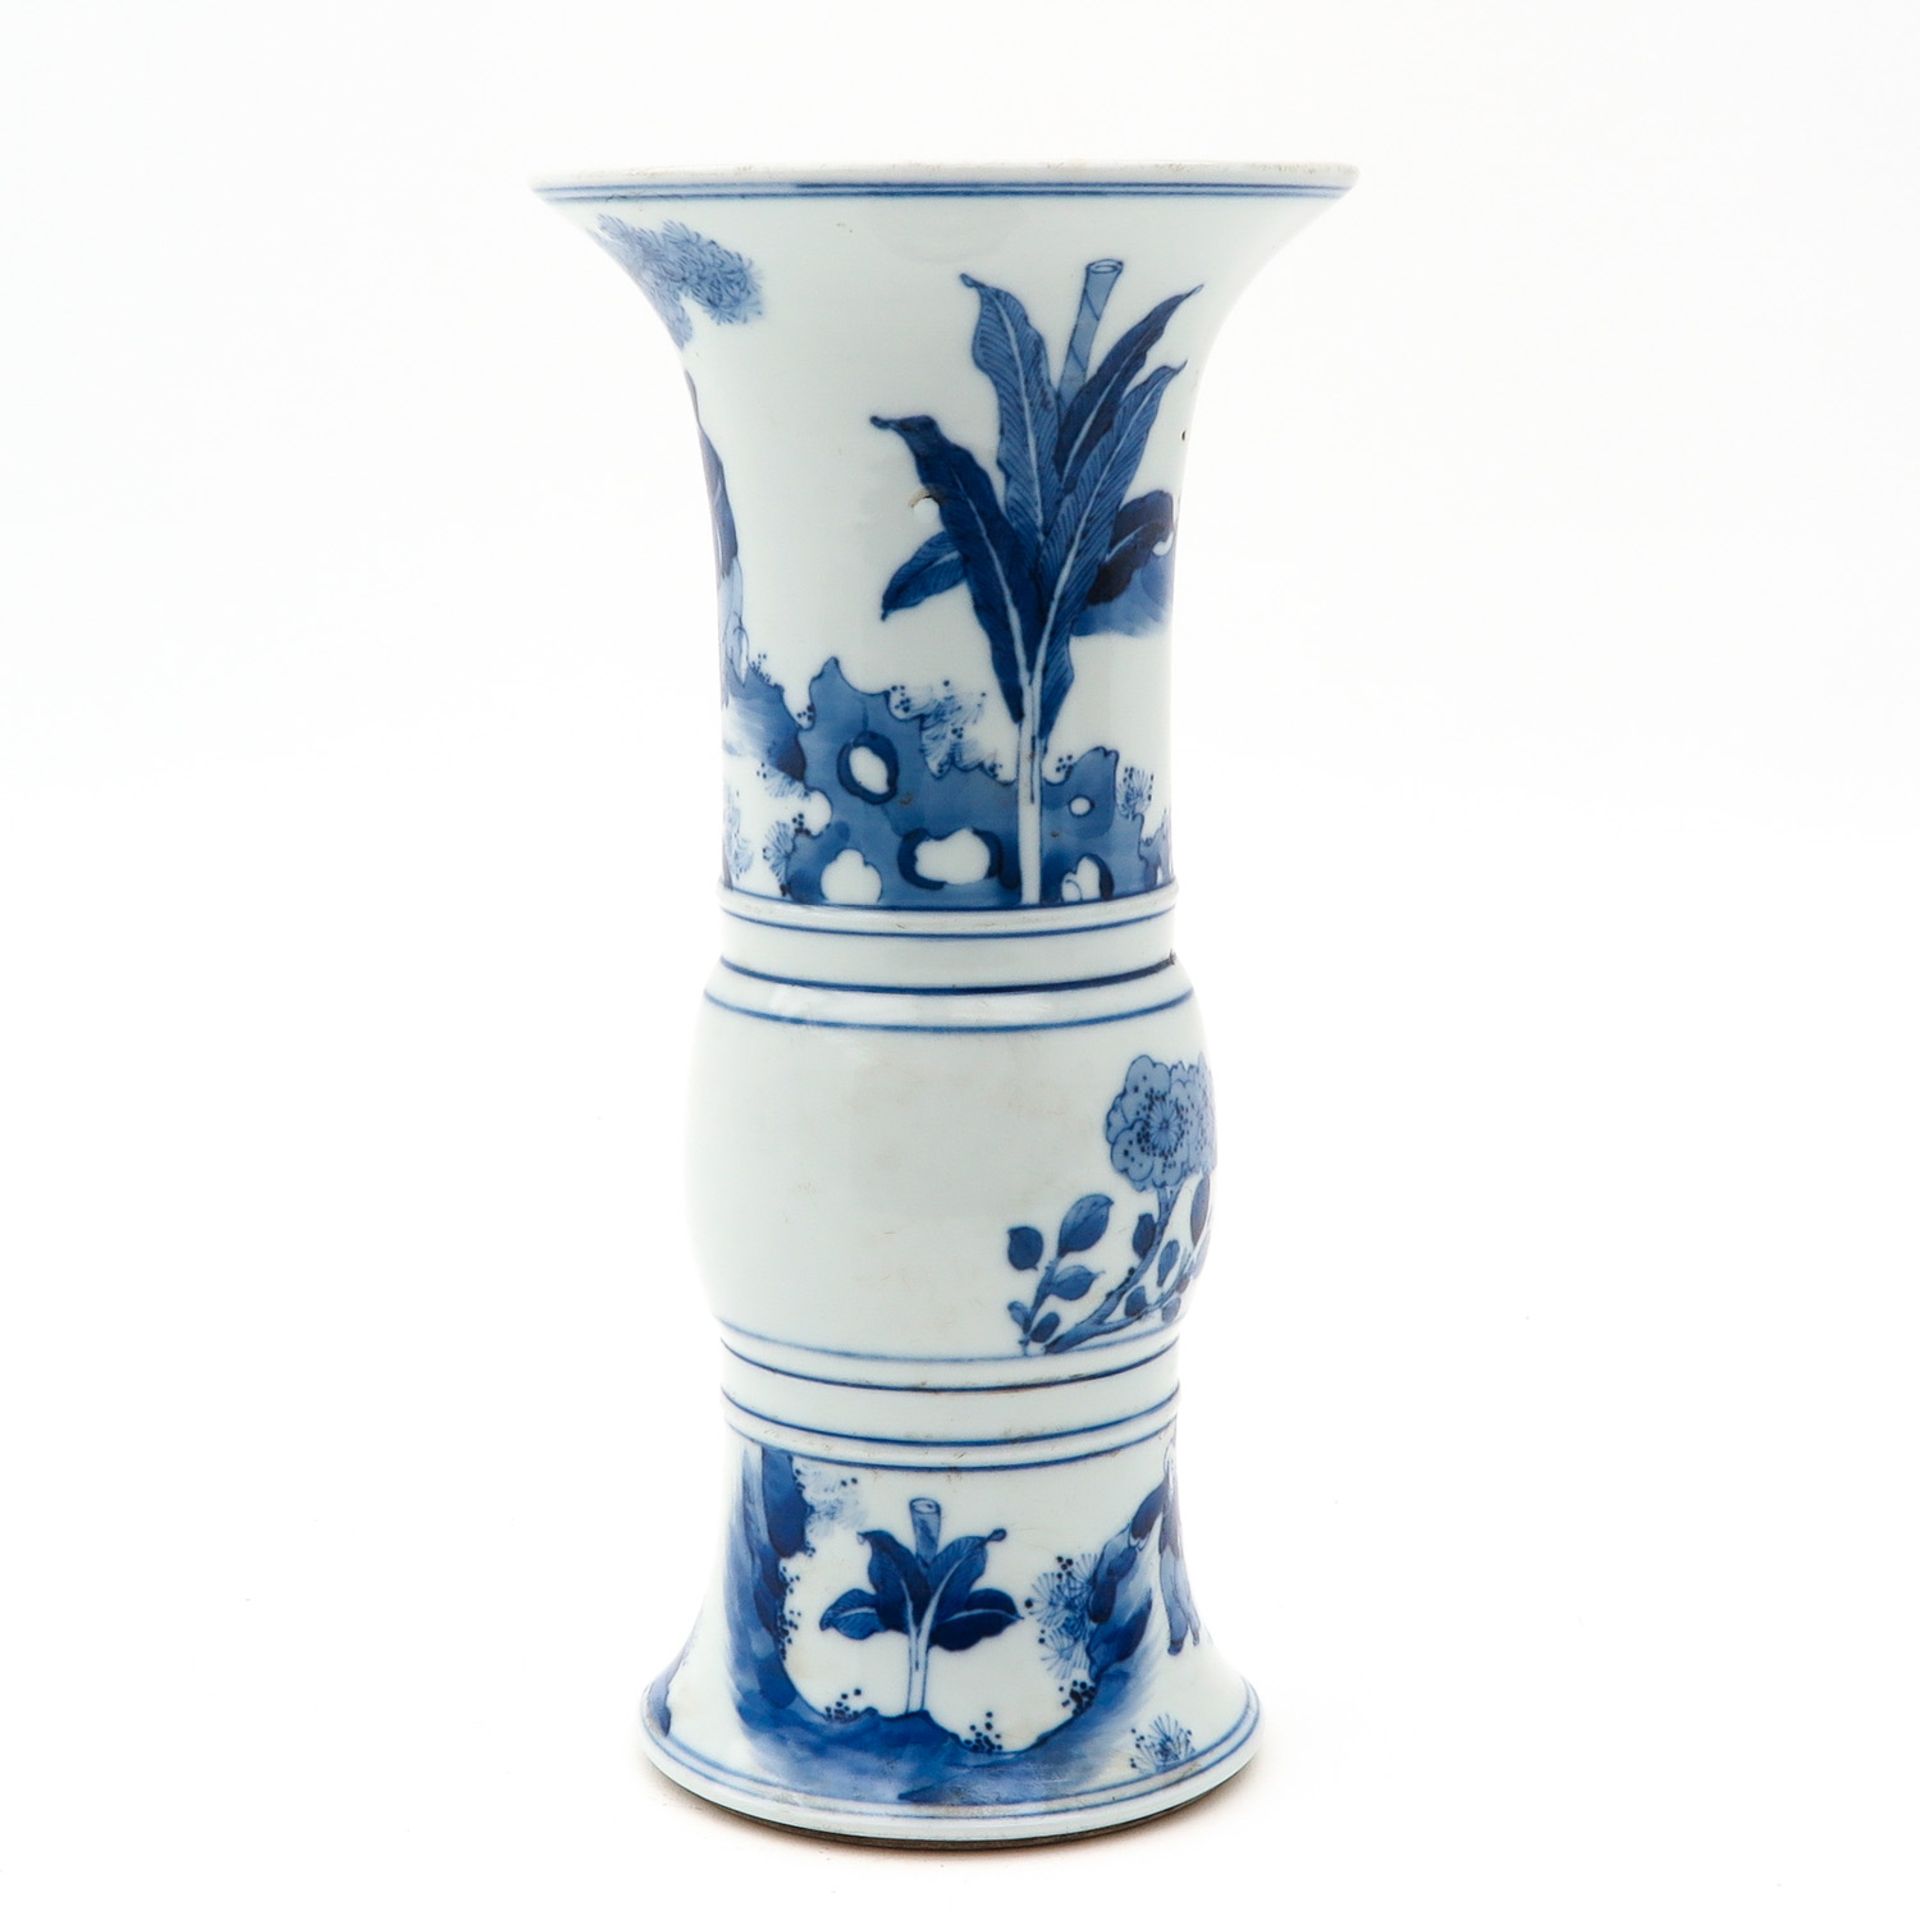 A Blue and White Gu Vase - Image 3 of 10